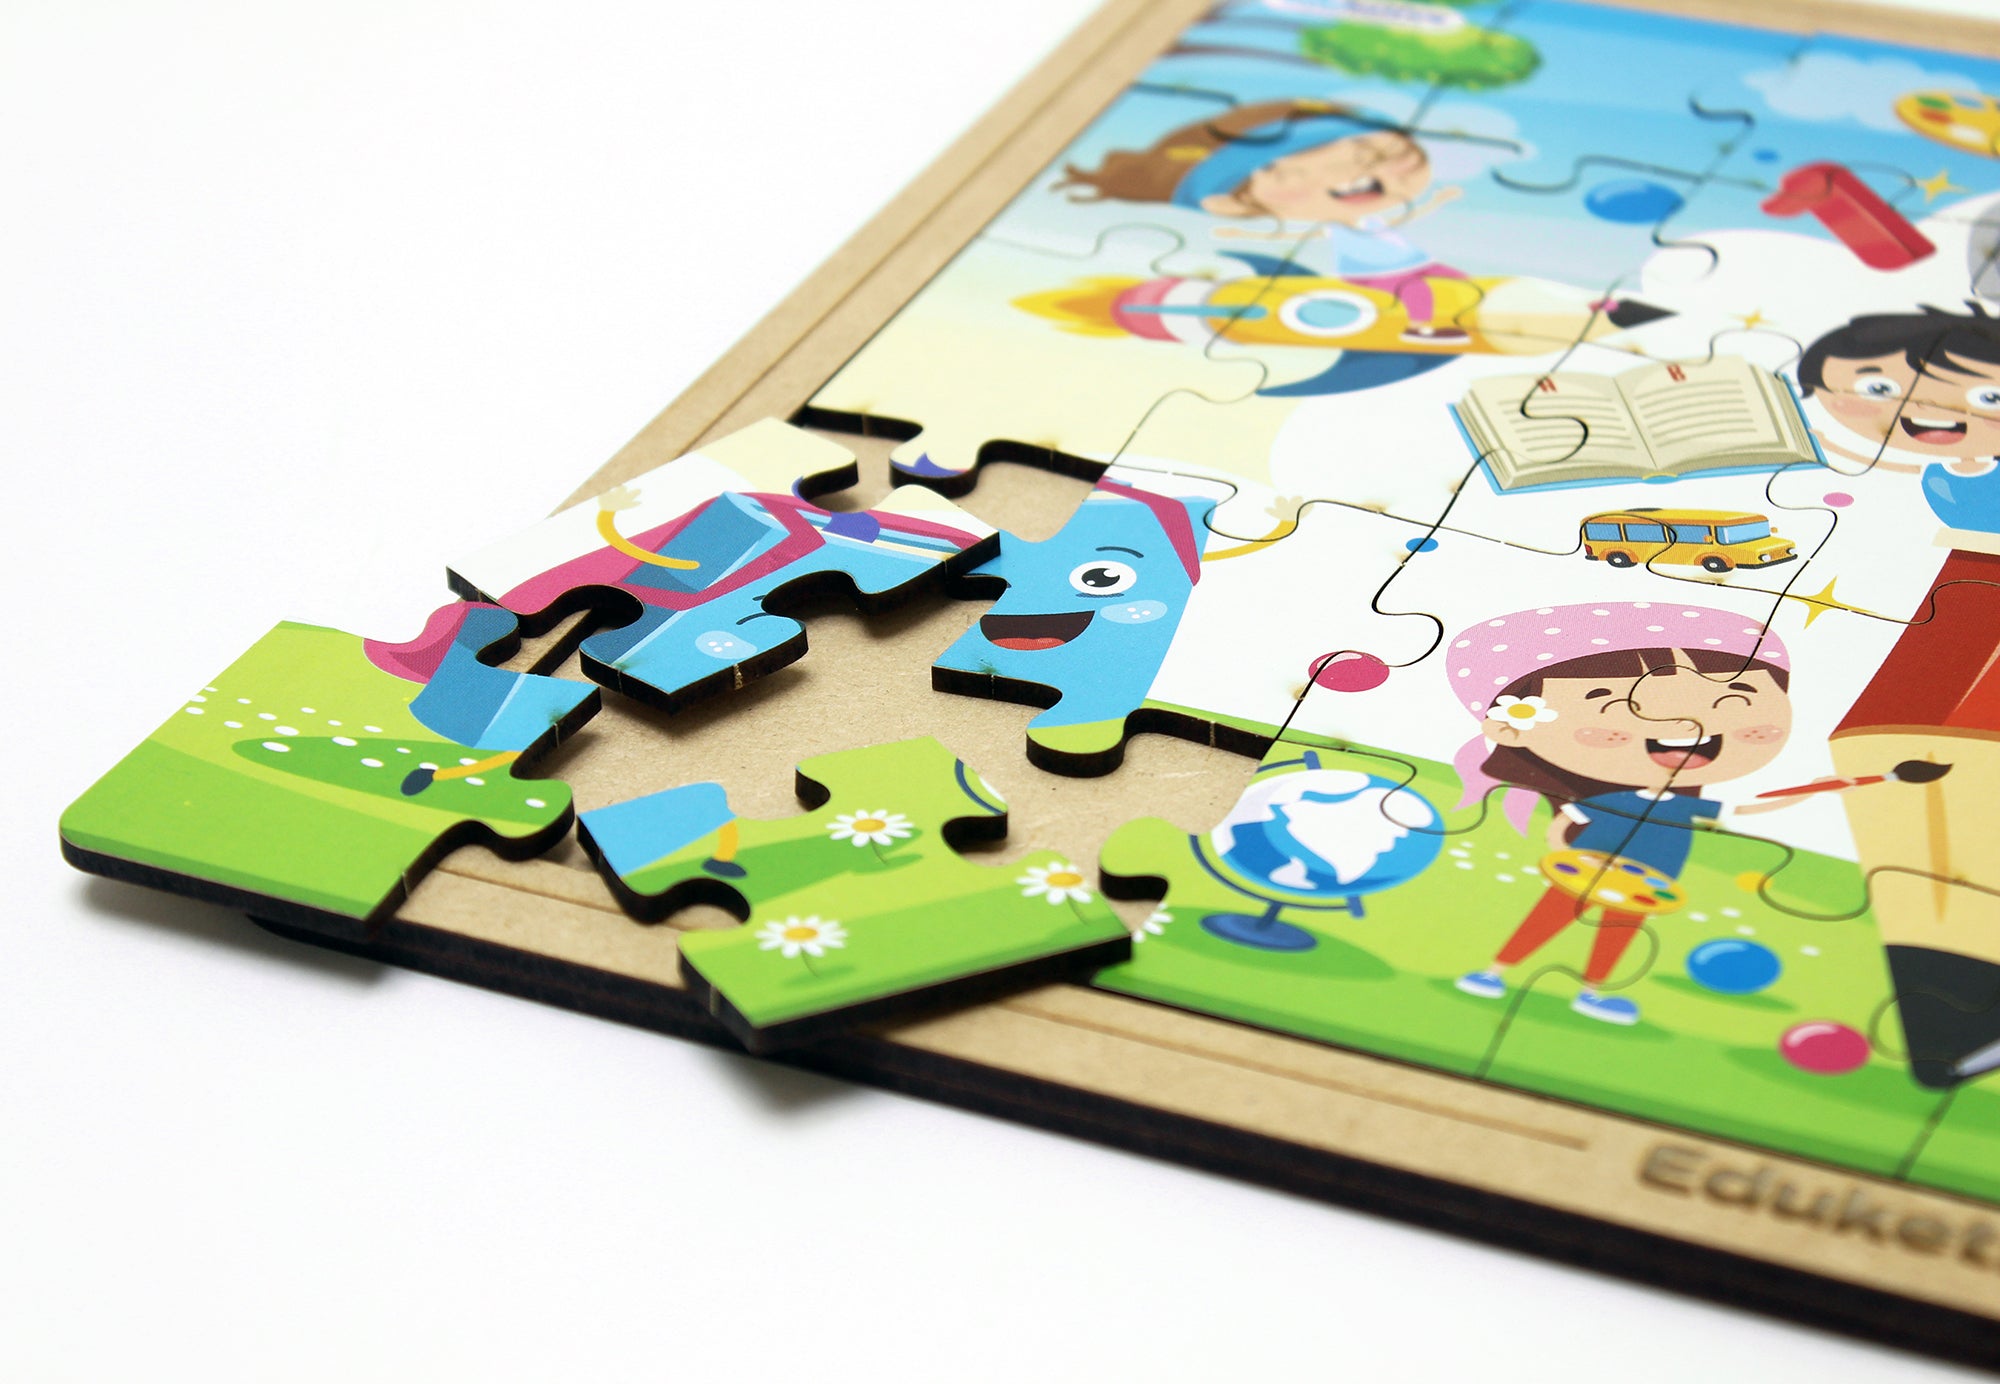 Back to School - Jigsaw Puzzle | Book Bargain Buy